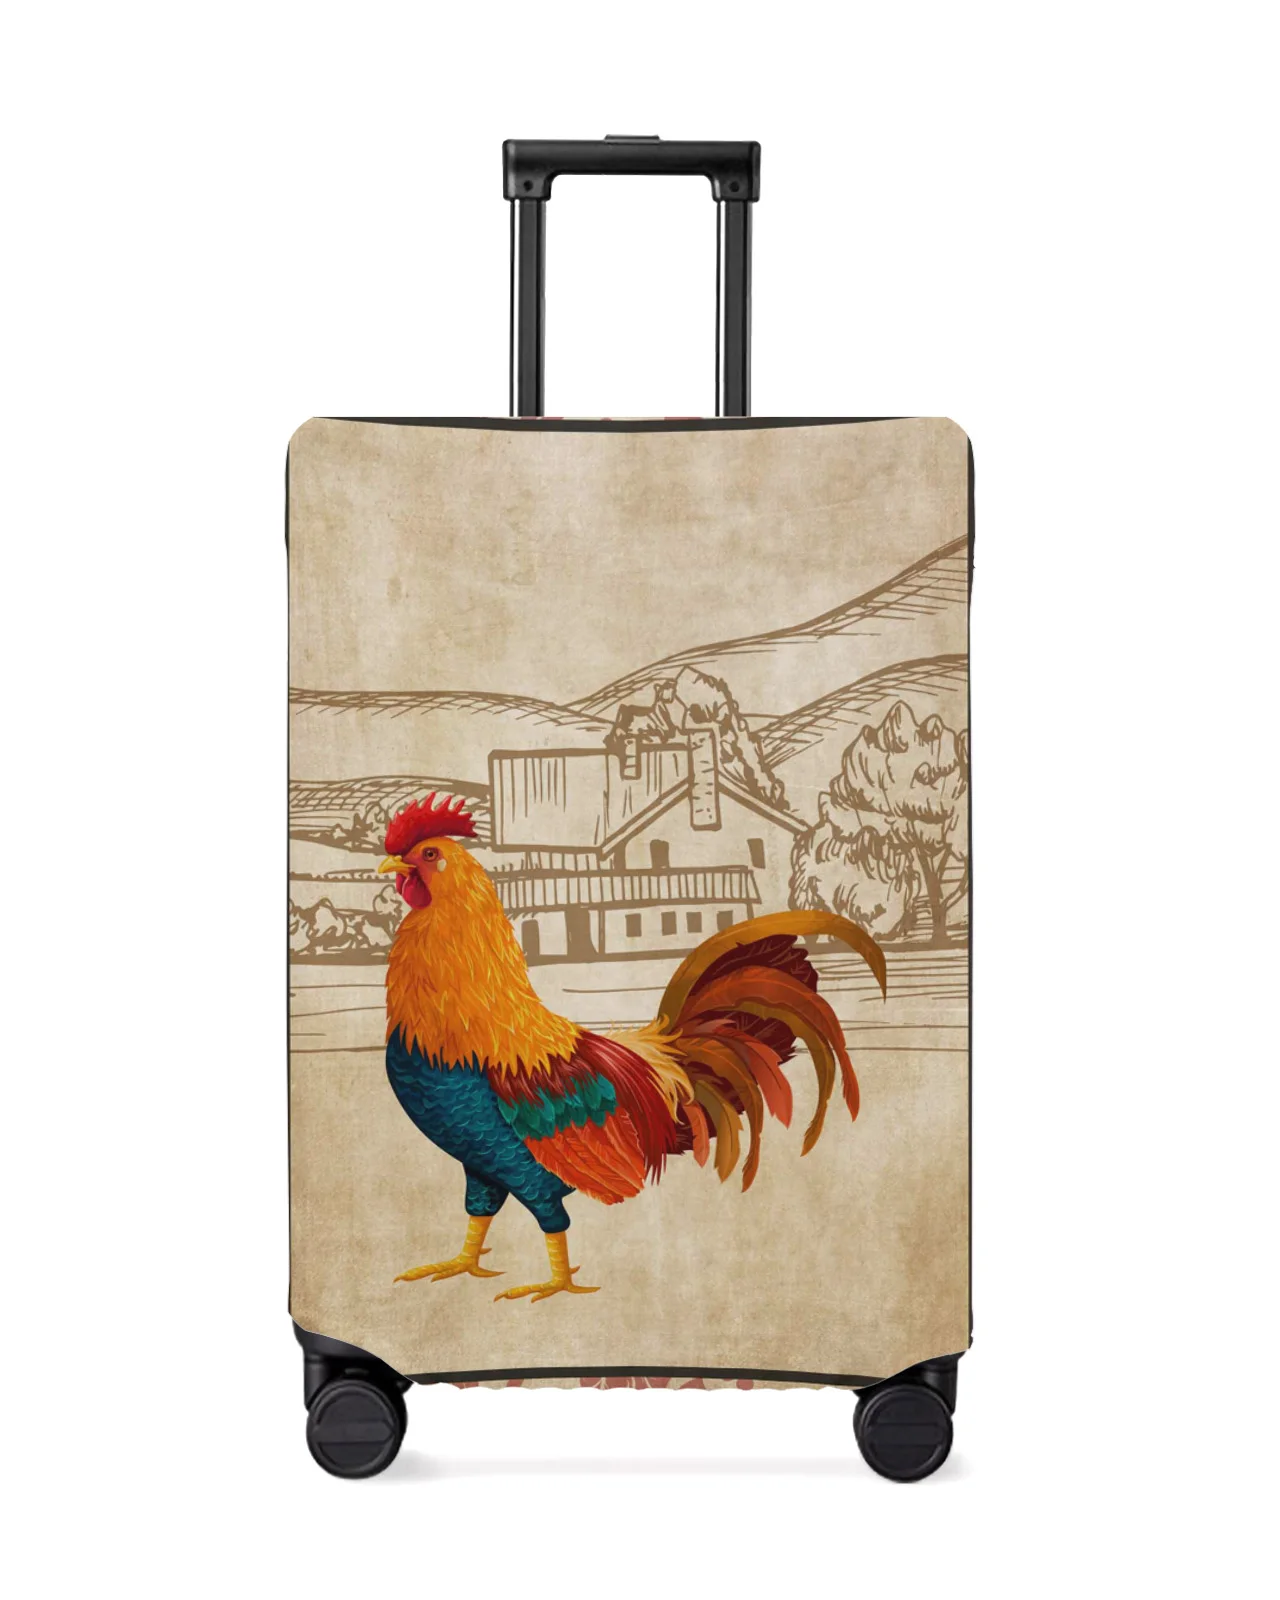 

Farm Rooster Pattern Retro Travel Luggage Cover Elastic Baggage Cover For 18-32 Inch Suitcase Case Dust Cover Travel Accessories